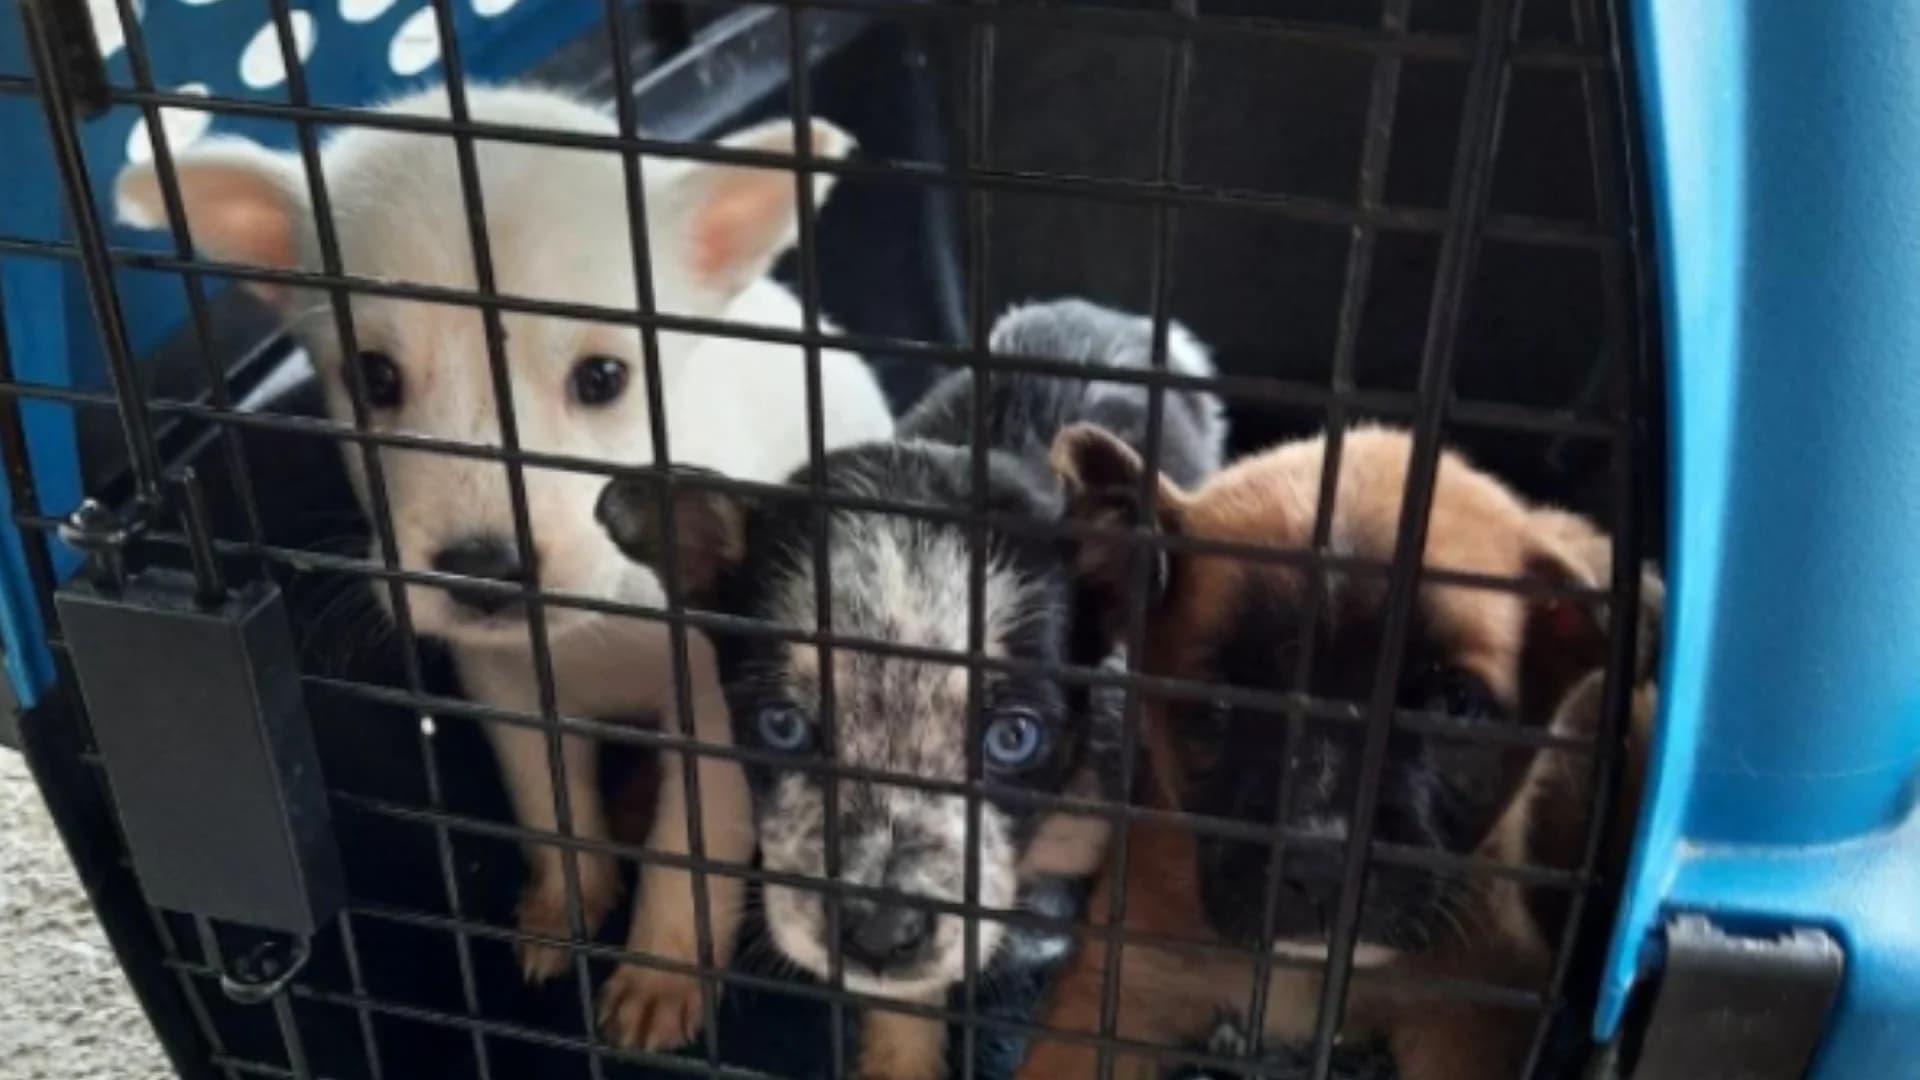 "This did not have to happen." Puppies found dumped in field